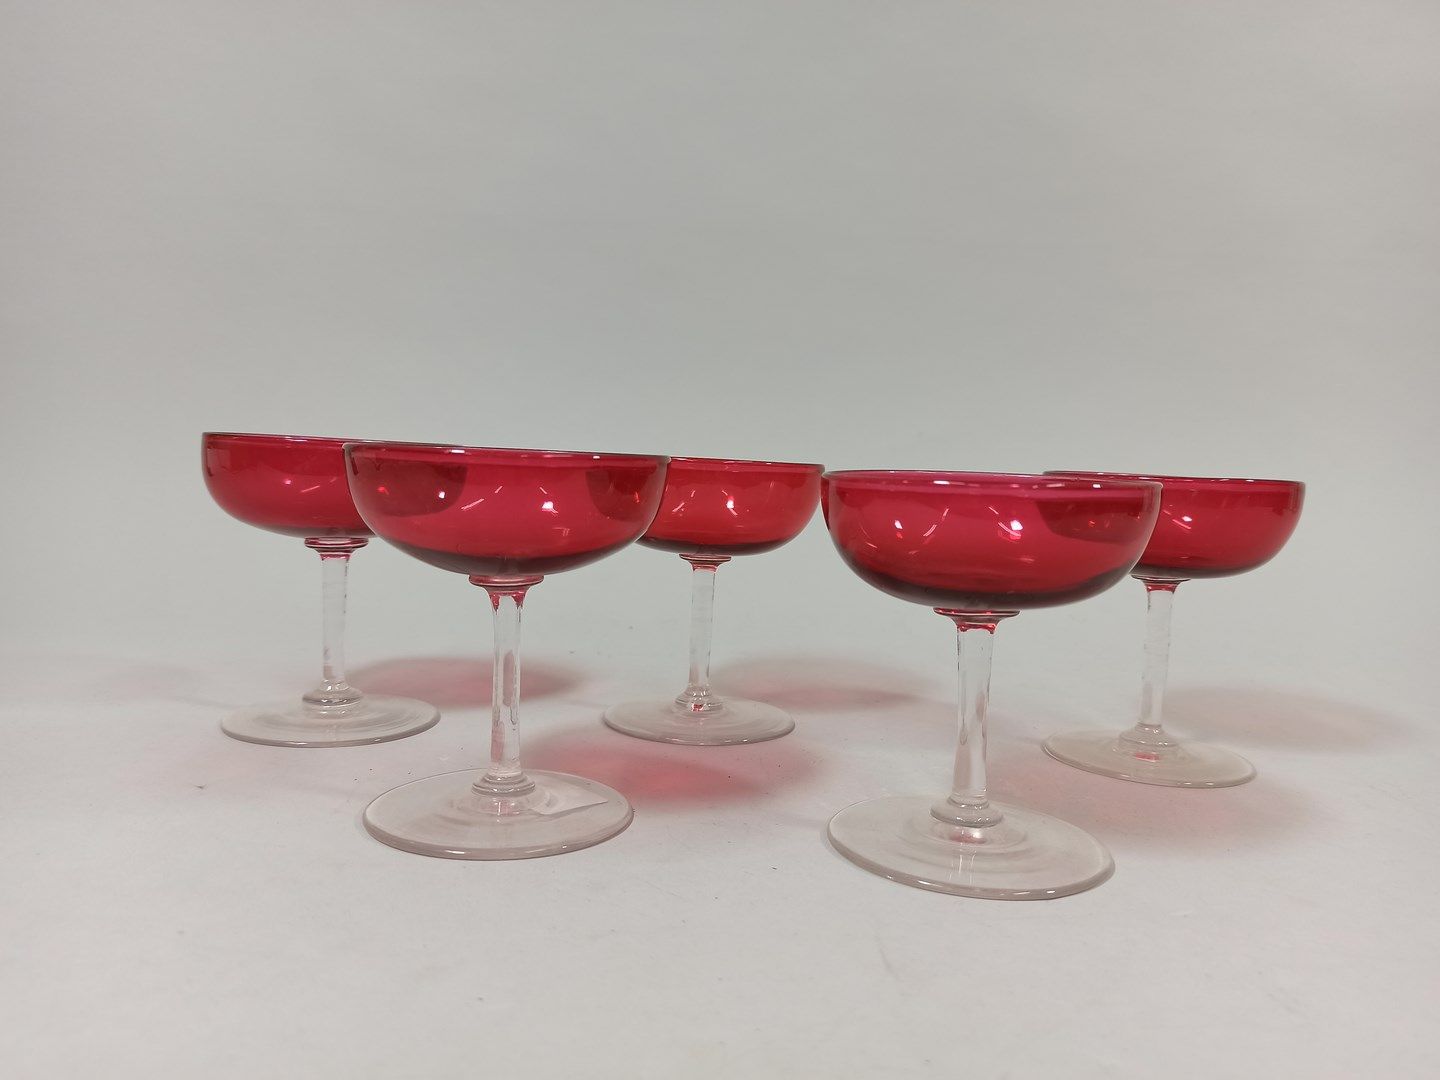 Null 5 champagne glasses in red tinted glass